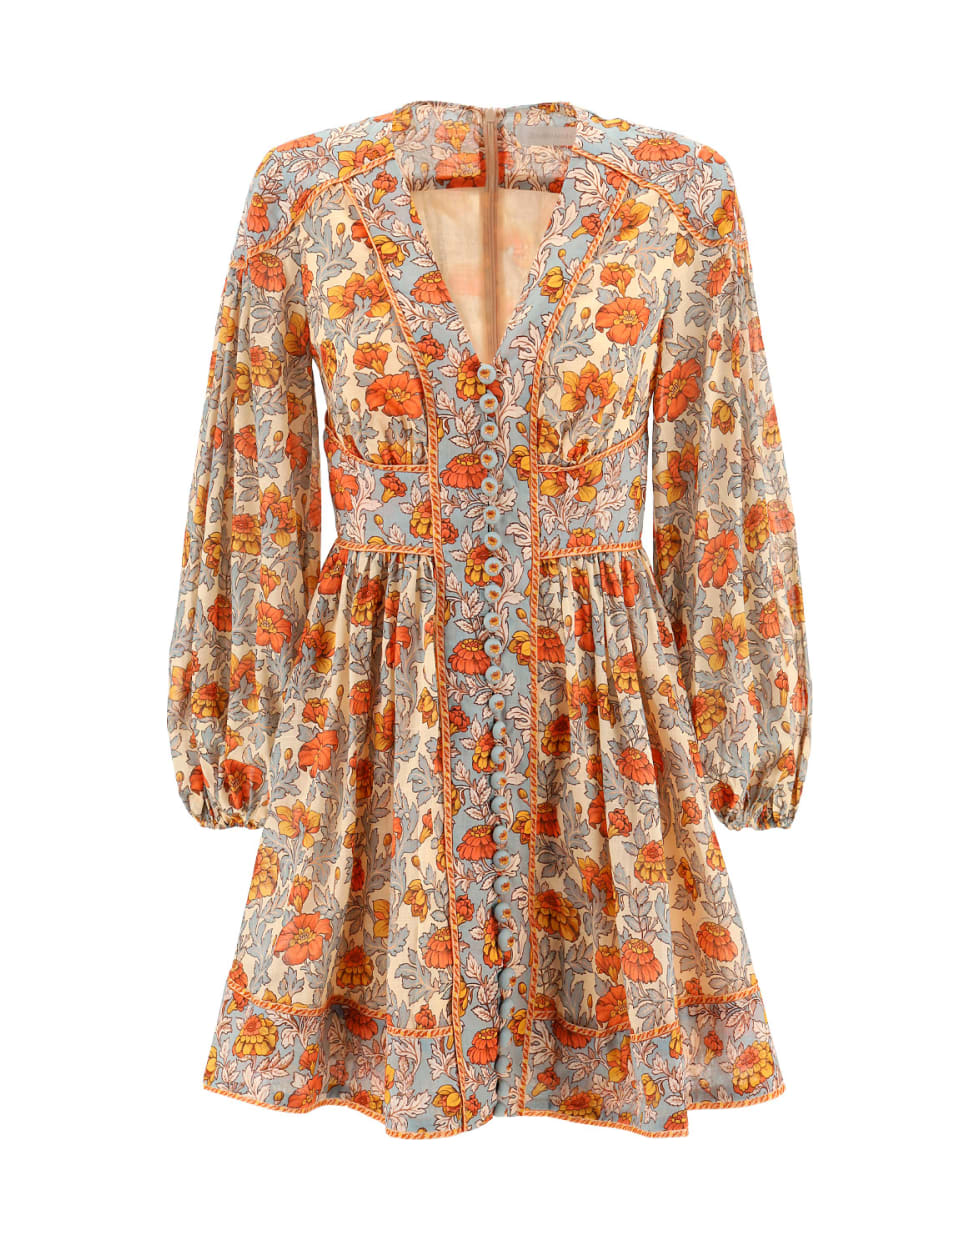 Zimmermann Andie Buttoned Mini Dress - Dusty blue floral